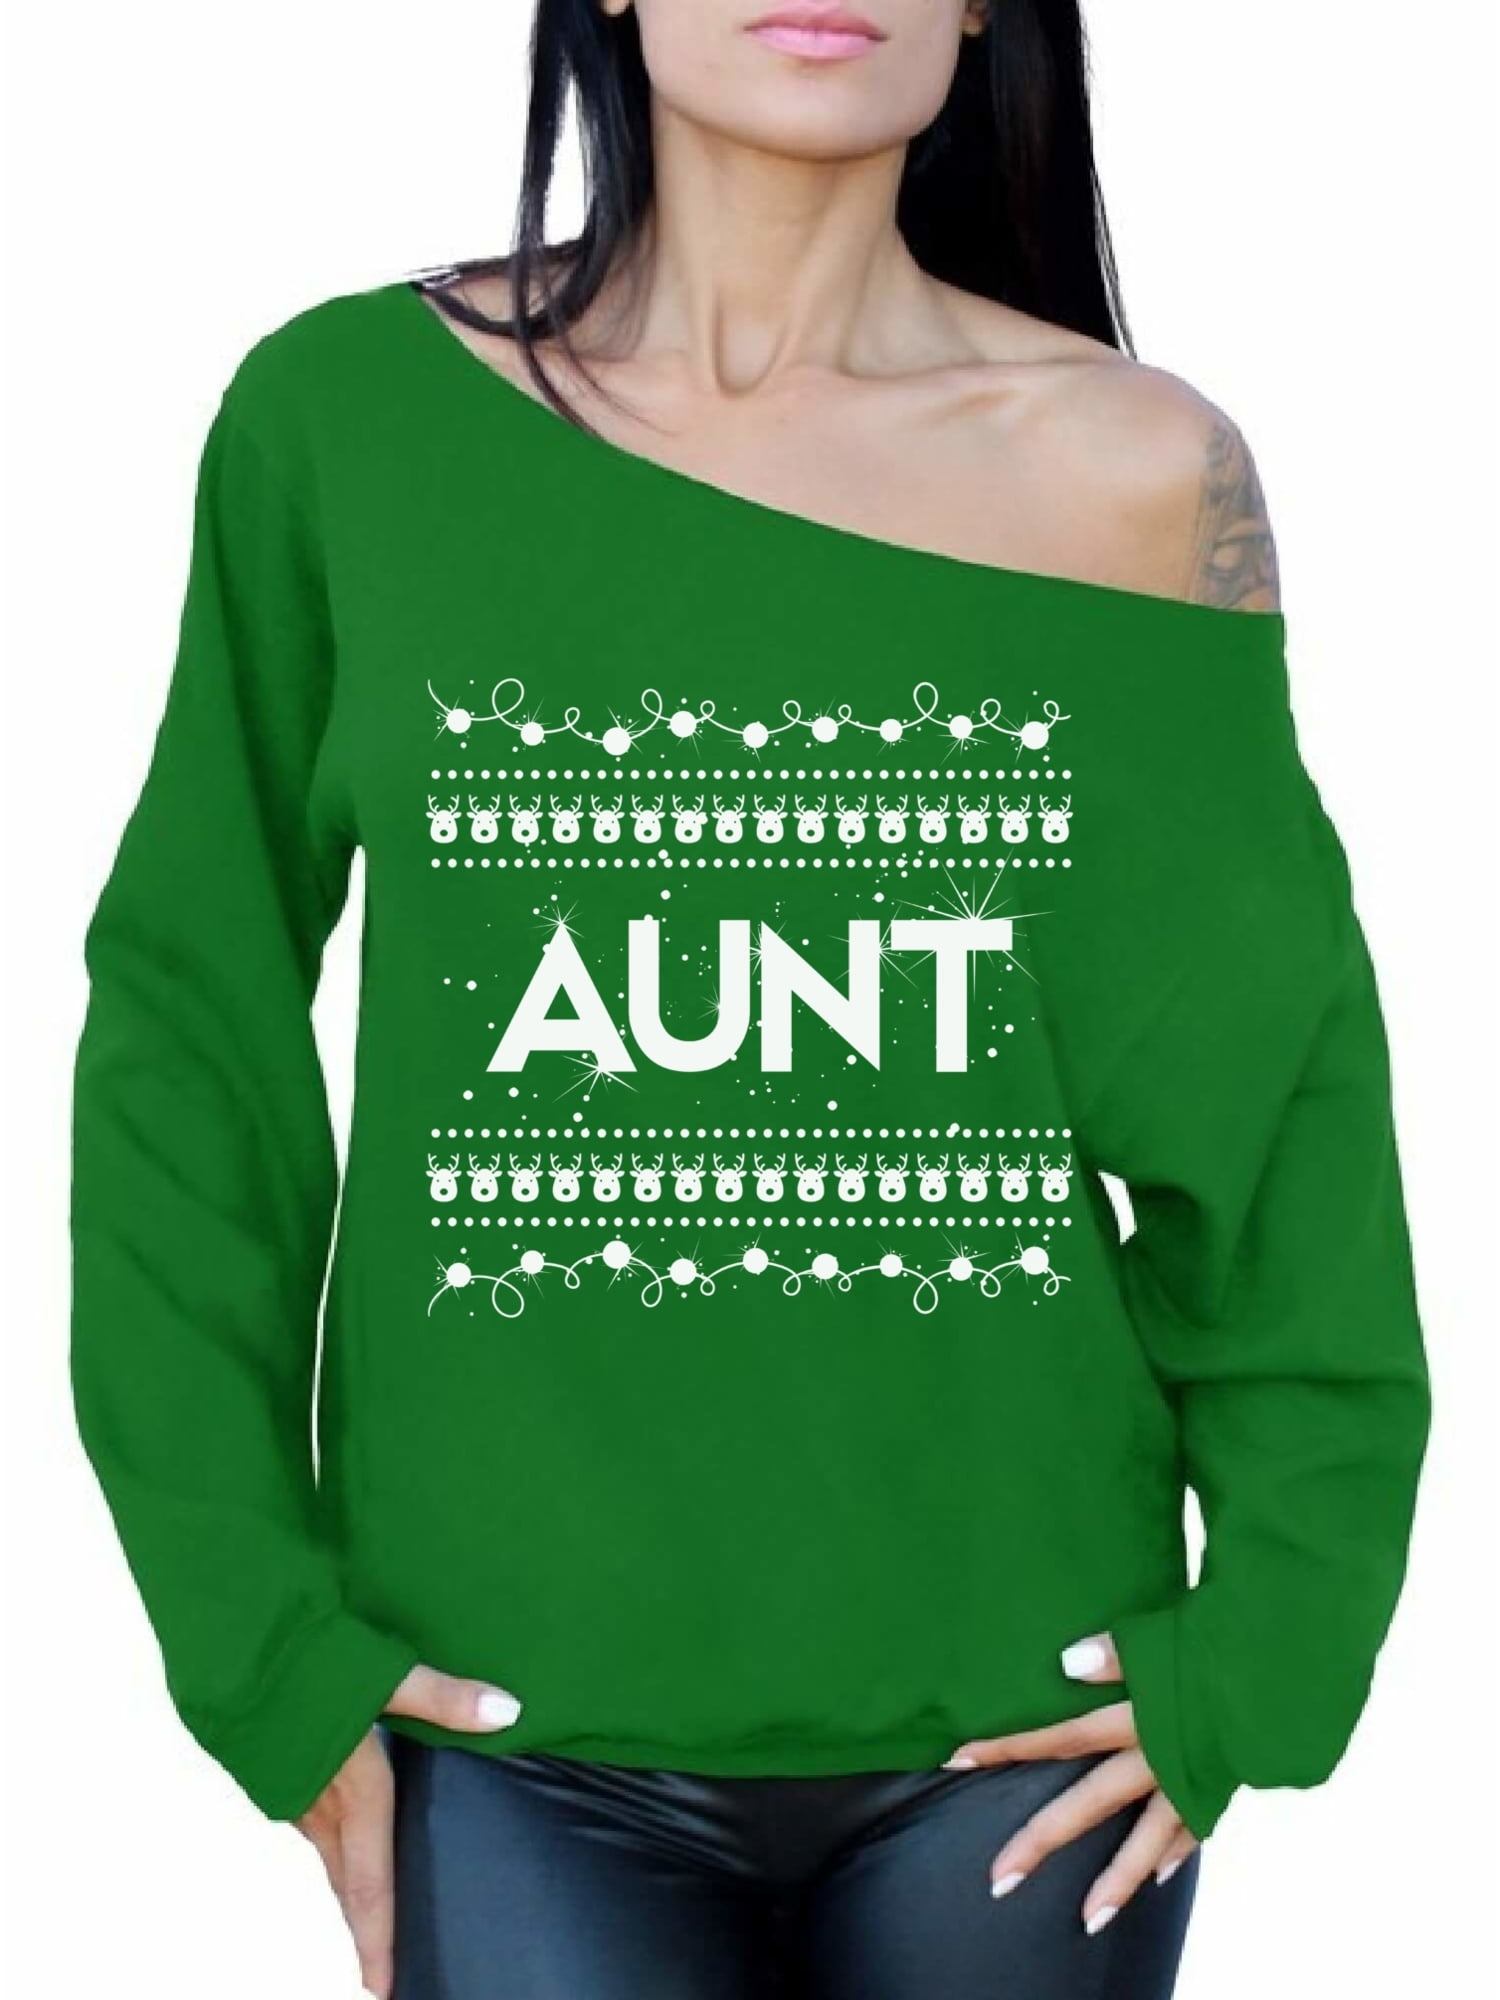 Santas Favorite Auntie Sweater Best Gift for Aunt On Christmas